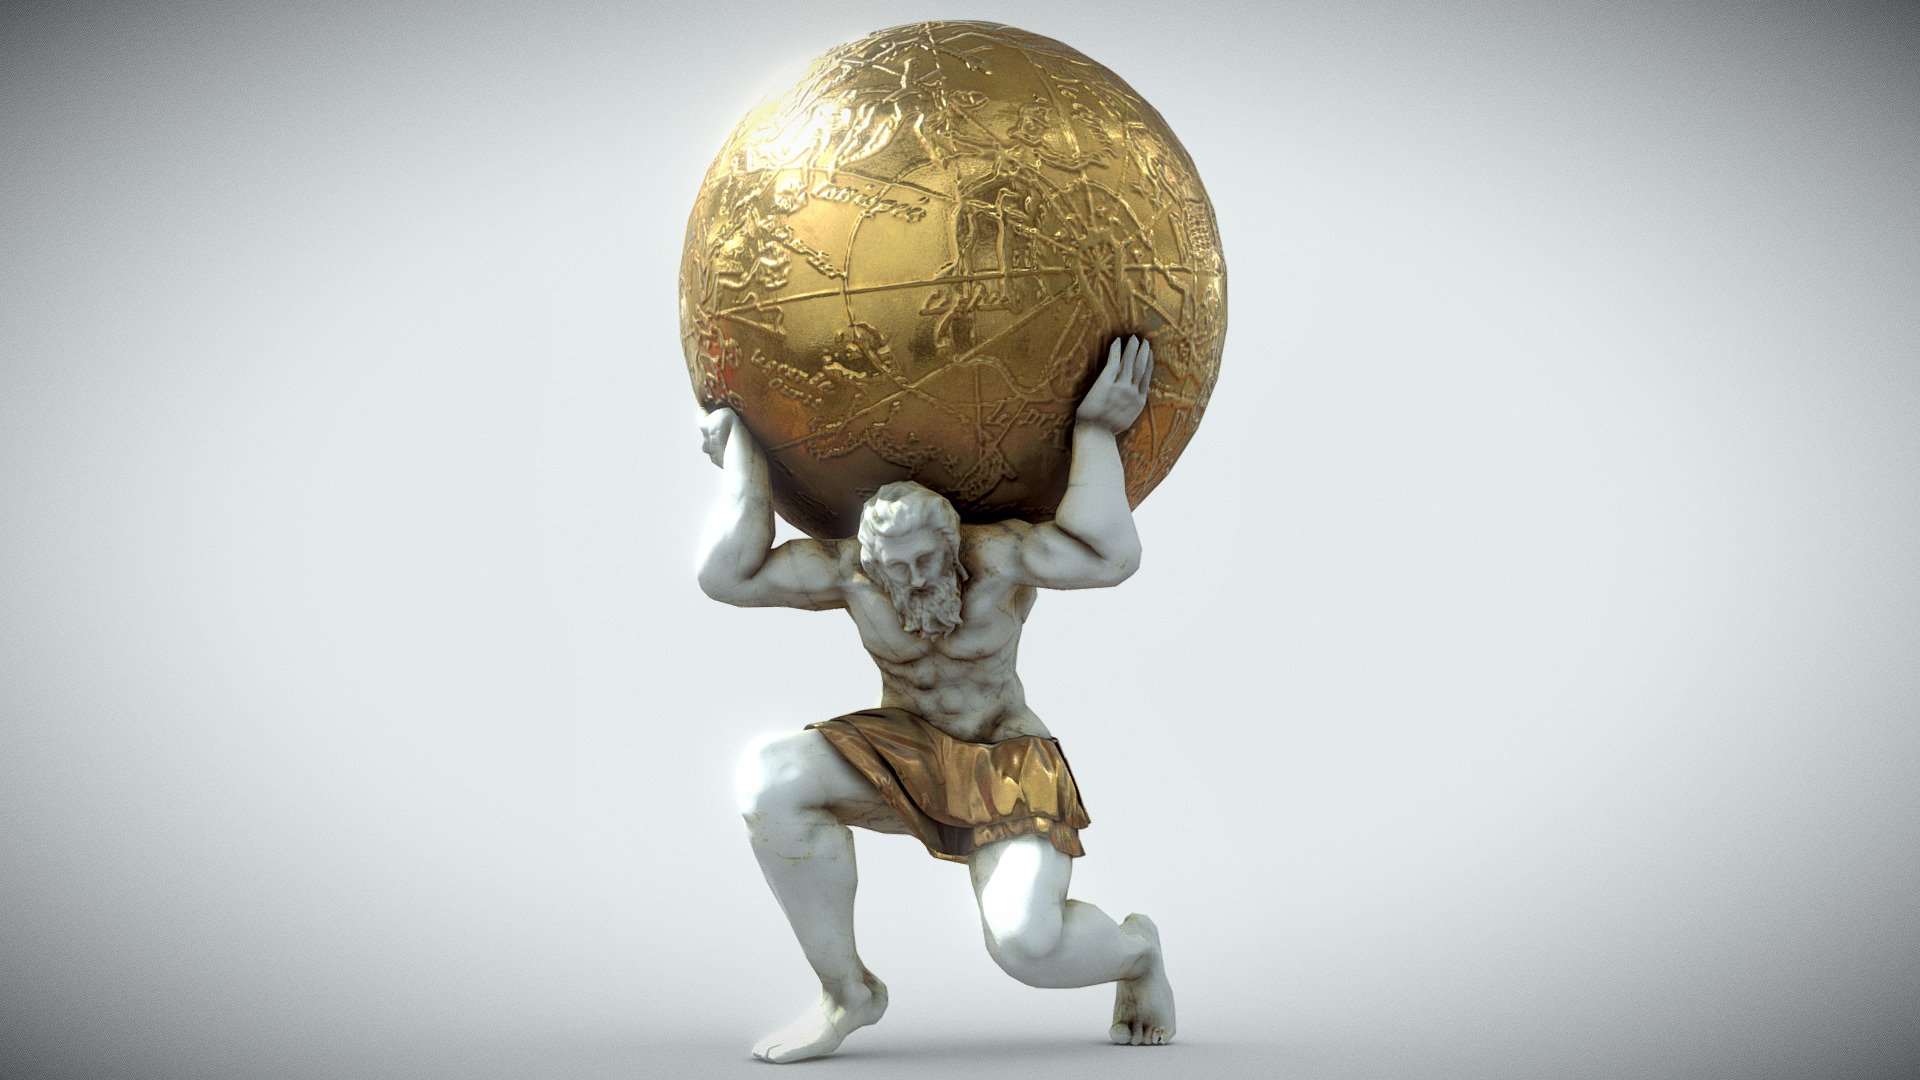 In Greek mythology, Atlas (Greek: Ἄτλας, Átlas) is a Titan condemned to hold up the heavens or sky for eternity after the Titanomachy

Separate materials and objects for the Sphere and the Atlas Body.
Both materials have 4k PBR textures.

Package also includes Bronze and Oxidized Bronze textures 3d model